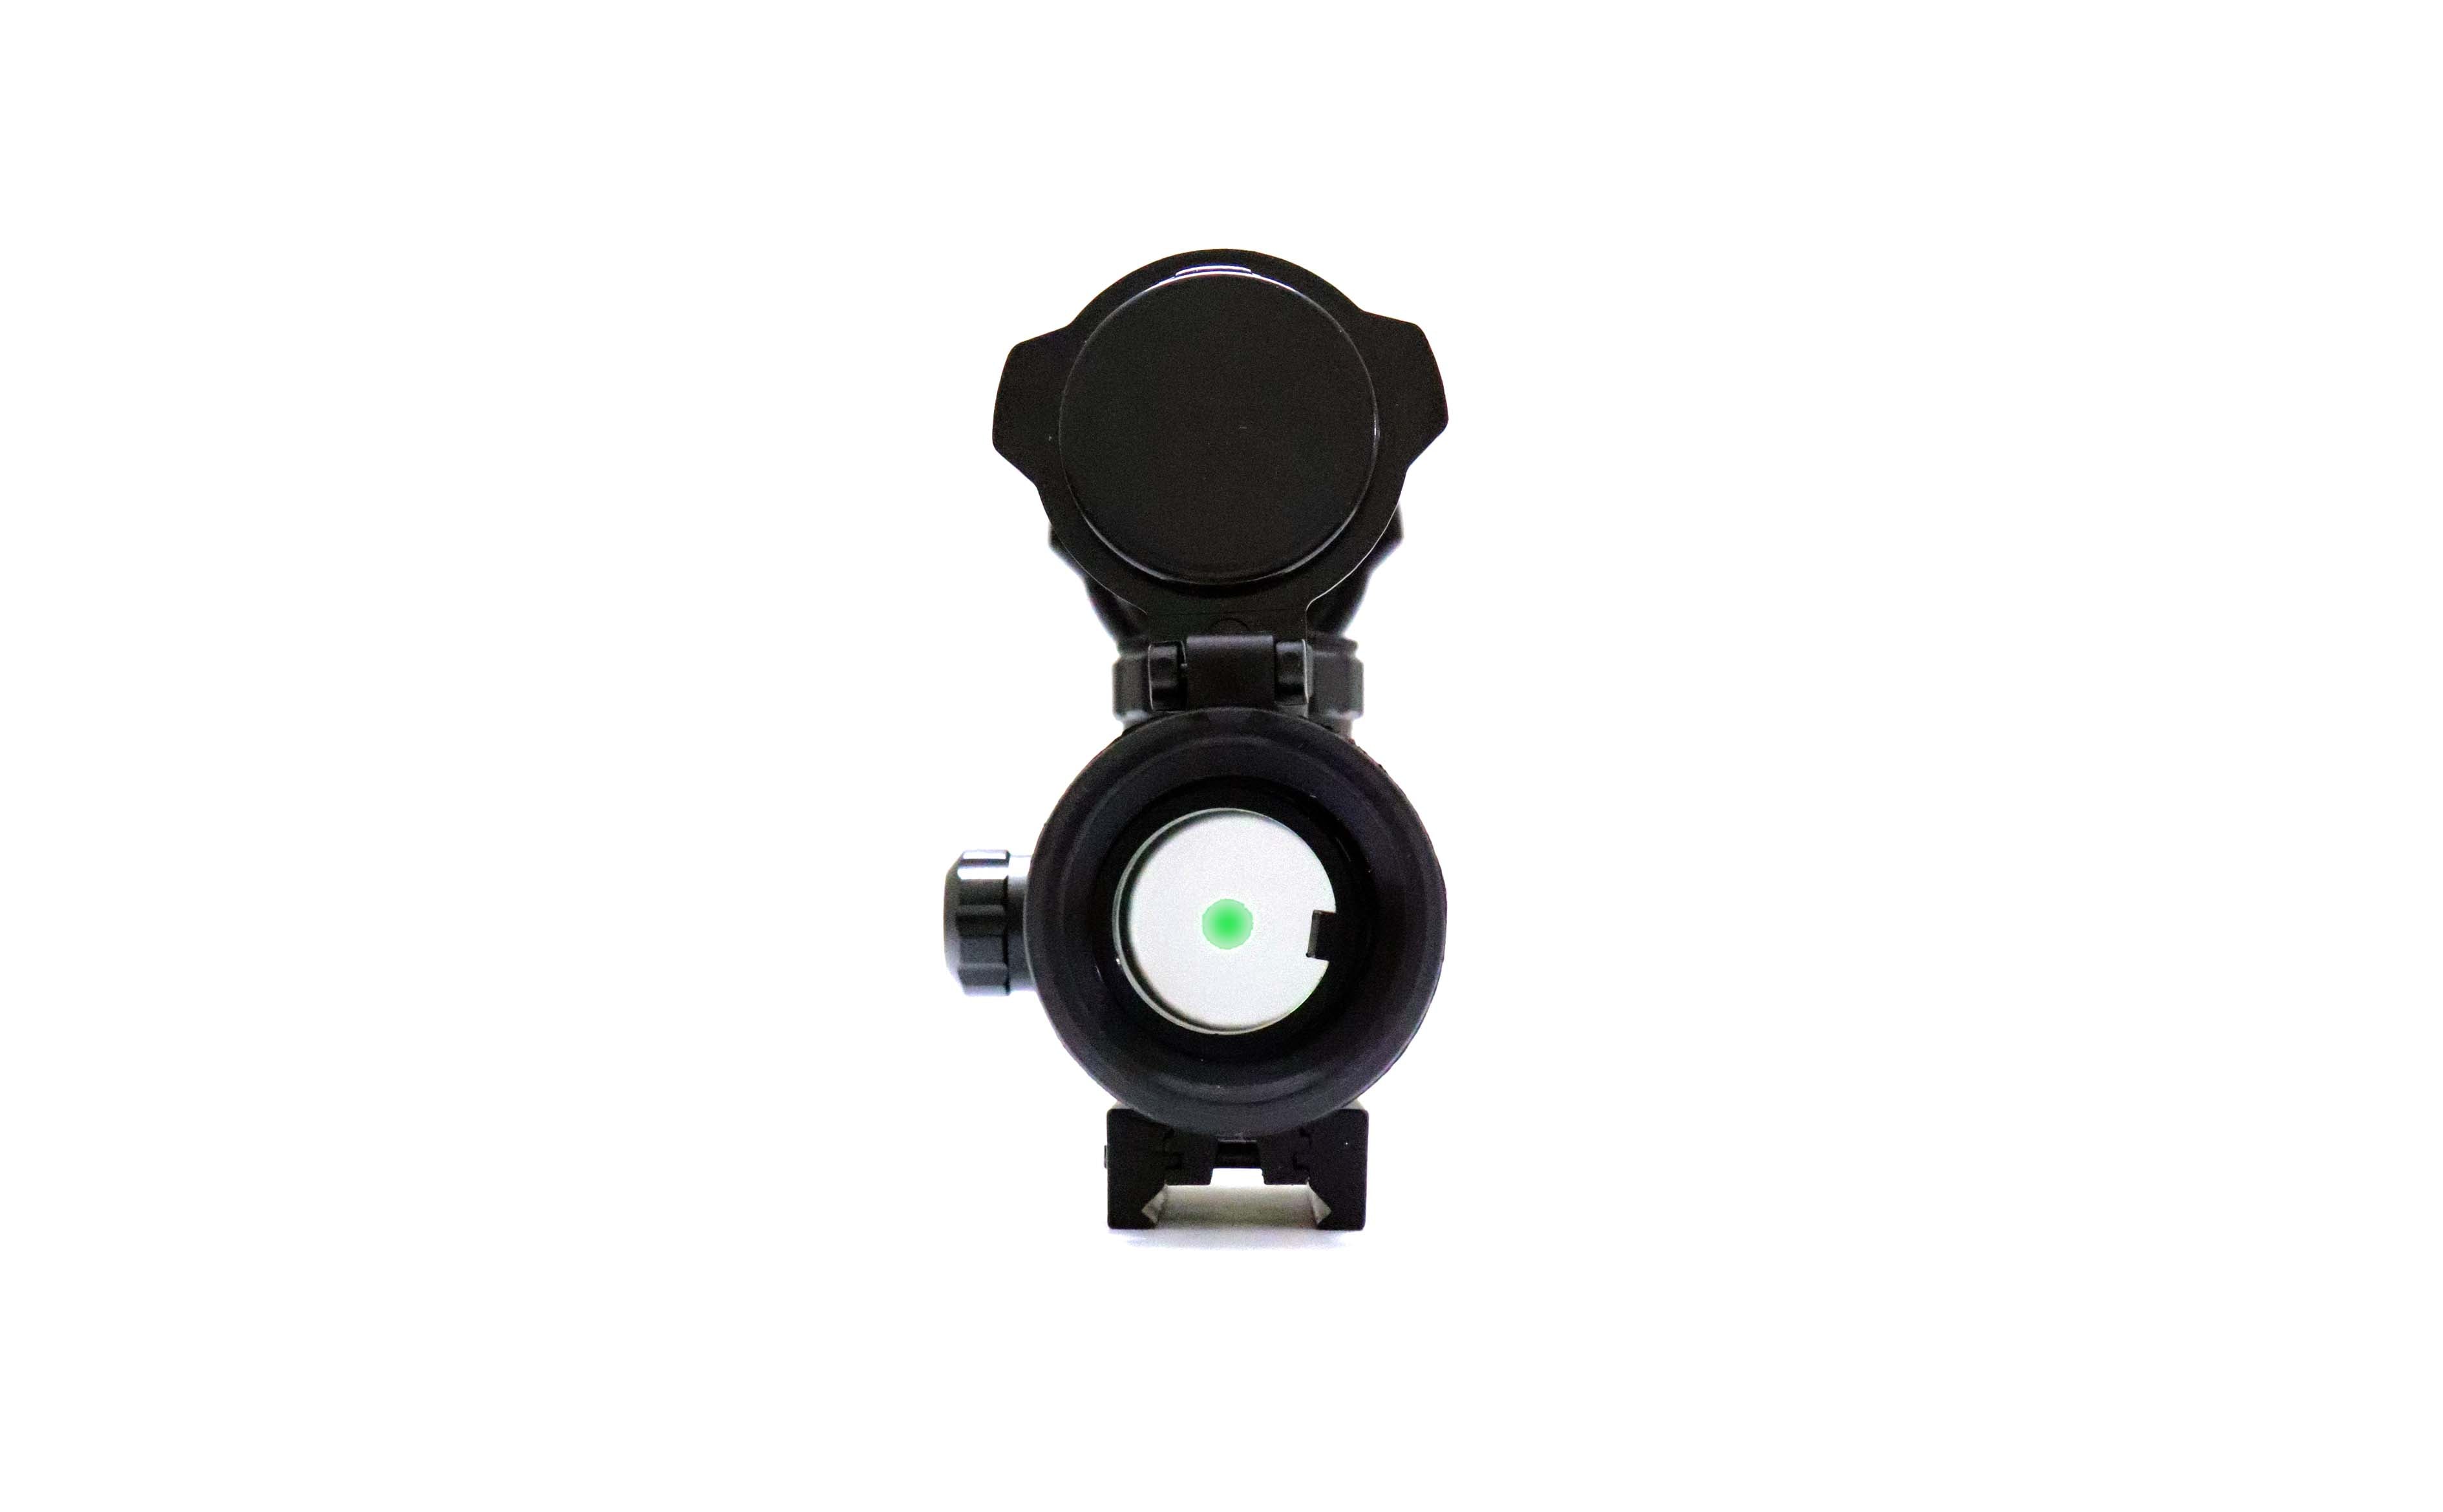 Illuminated Red Dot Sight - Cynosure Sports and Outdoors Pvt Ltd